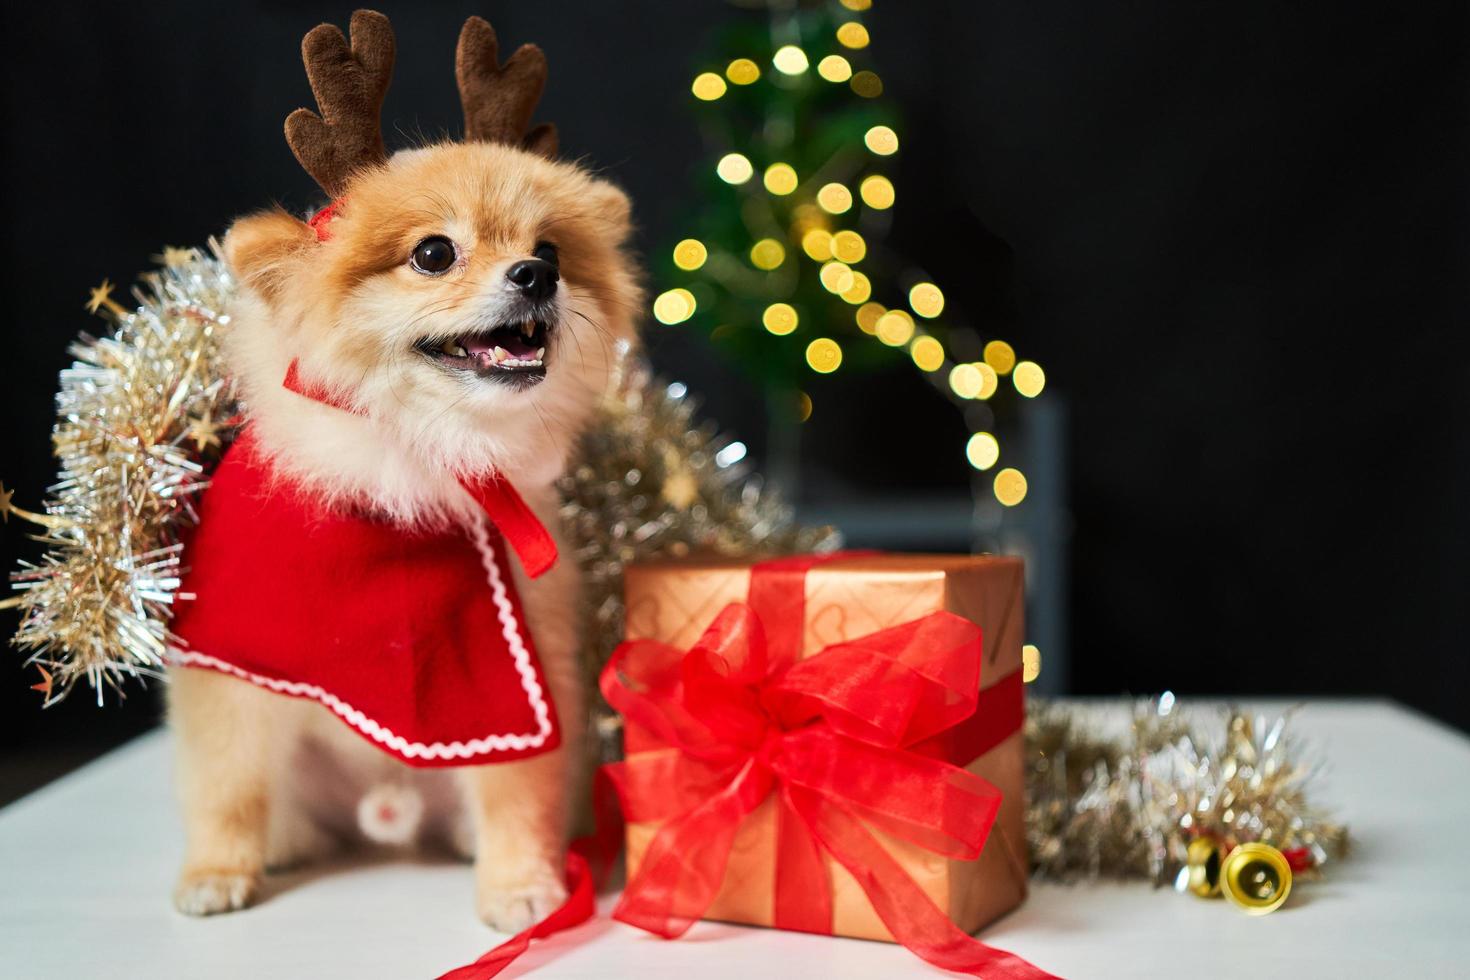 fluffy dog Pomeranian with a rim of a deer horn cap near the Christmas tree and box of gift. background of new year decorations. pet and holiday photo